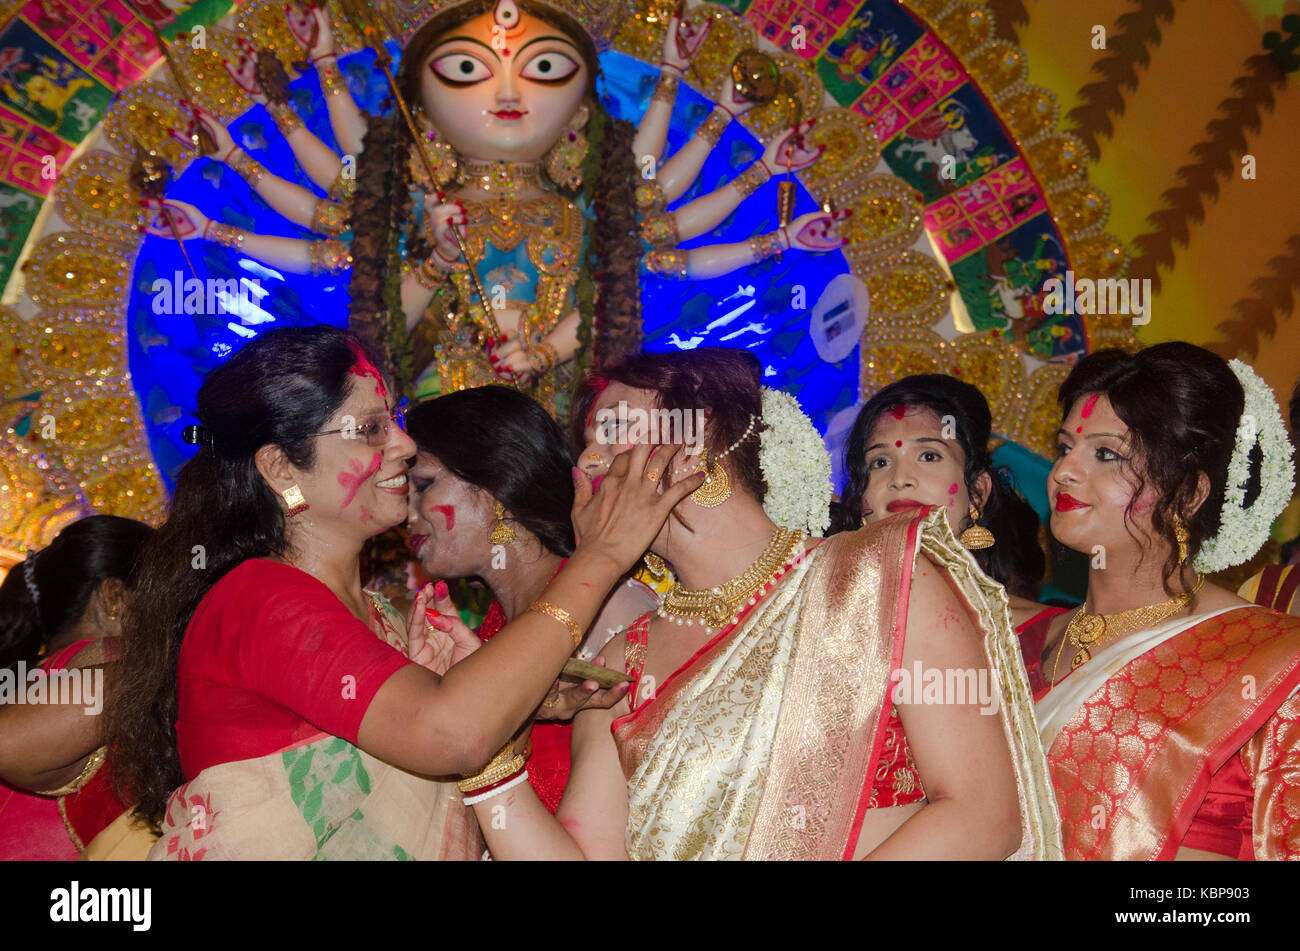 Kolkata, India. 30th Sep, 2017. Women & Child Development and Social Welfare Minster Dr. Shashi Panja apply vermilion on a transgender person as they perform Sidur Khela or Baran rituals before the immersion of goddess Durga on the last day of Durga Puja inside a pandal or temporary platform in Kolkata, West Bengal, India on 30 September 2017. Credit: Avijit Ghosh/Pacific Press/Alamy Live News Stock Photo